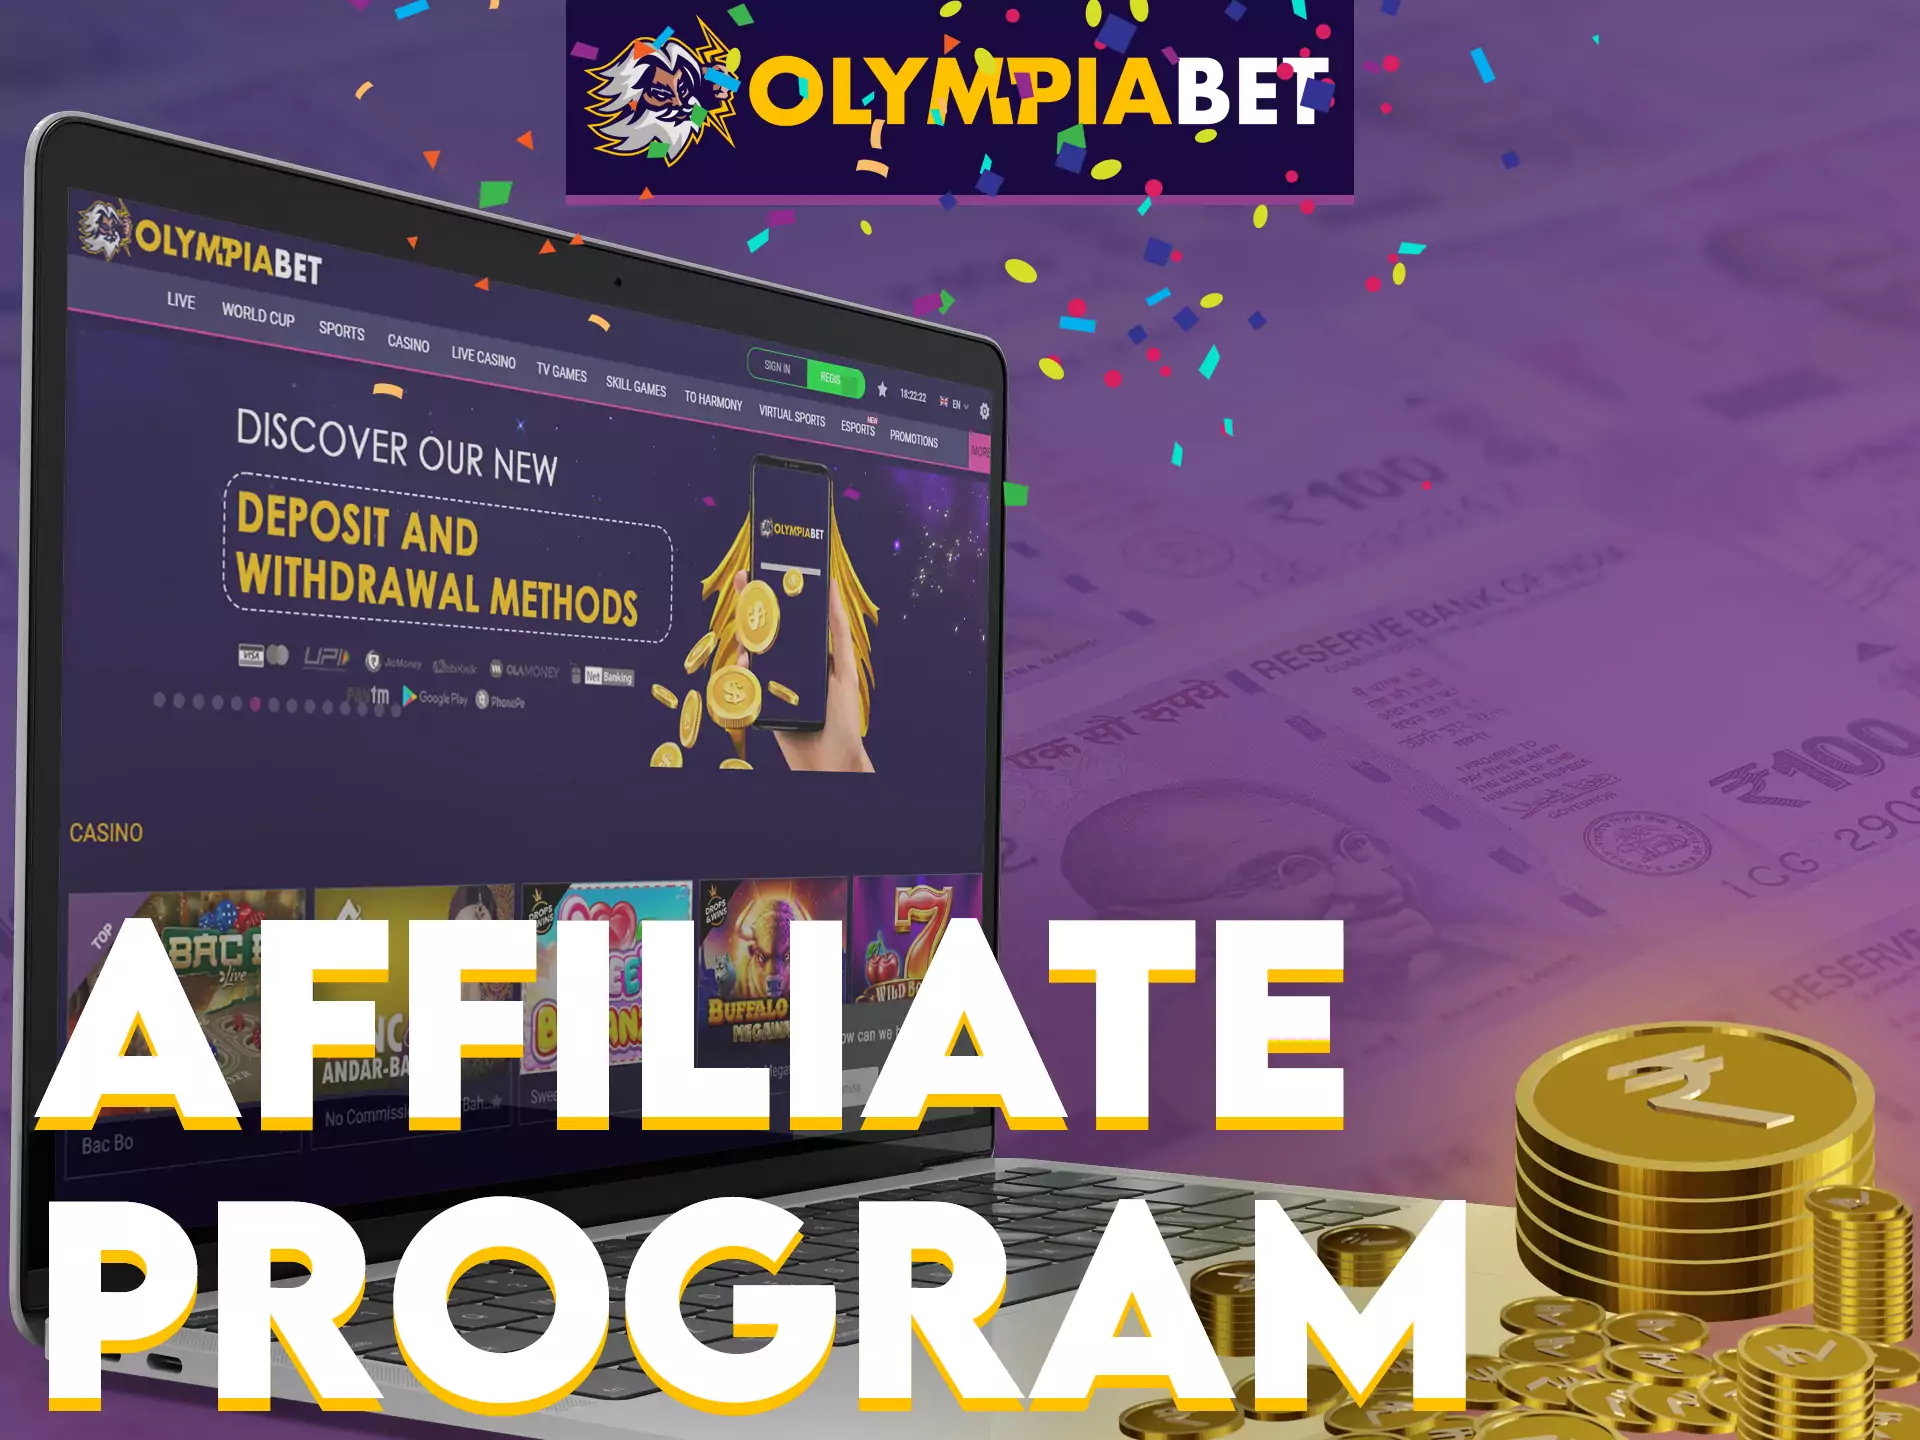 Join the OlympiaBet affiliate program and get nice bonuses.